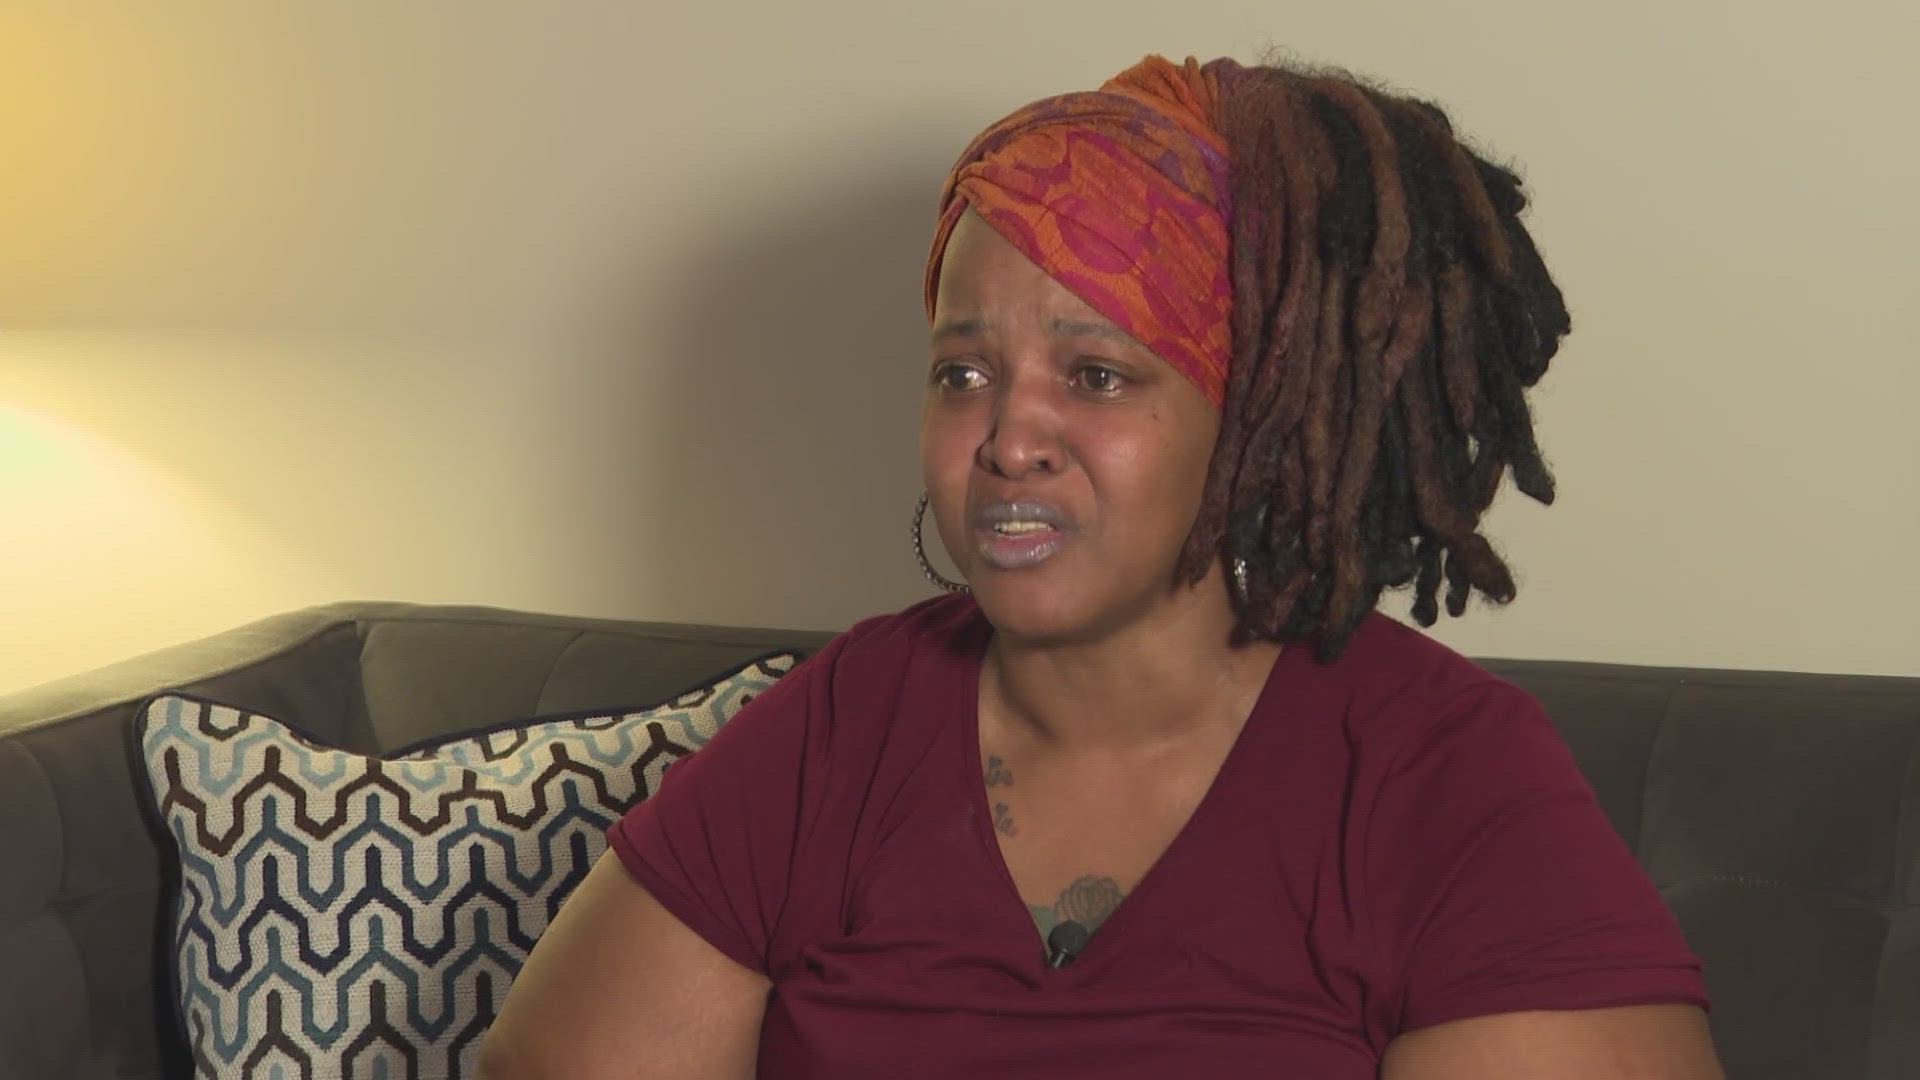 Jamilya Henderson says she and two of her teenage daughters are sleeping in three-hour intervals on a relative's couch while they search for affordable housing.